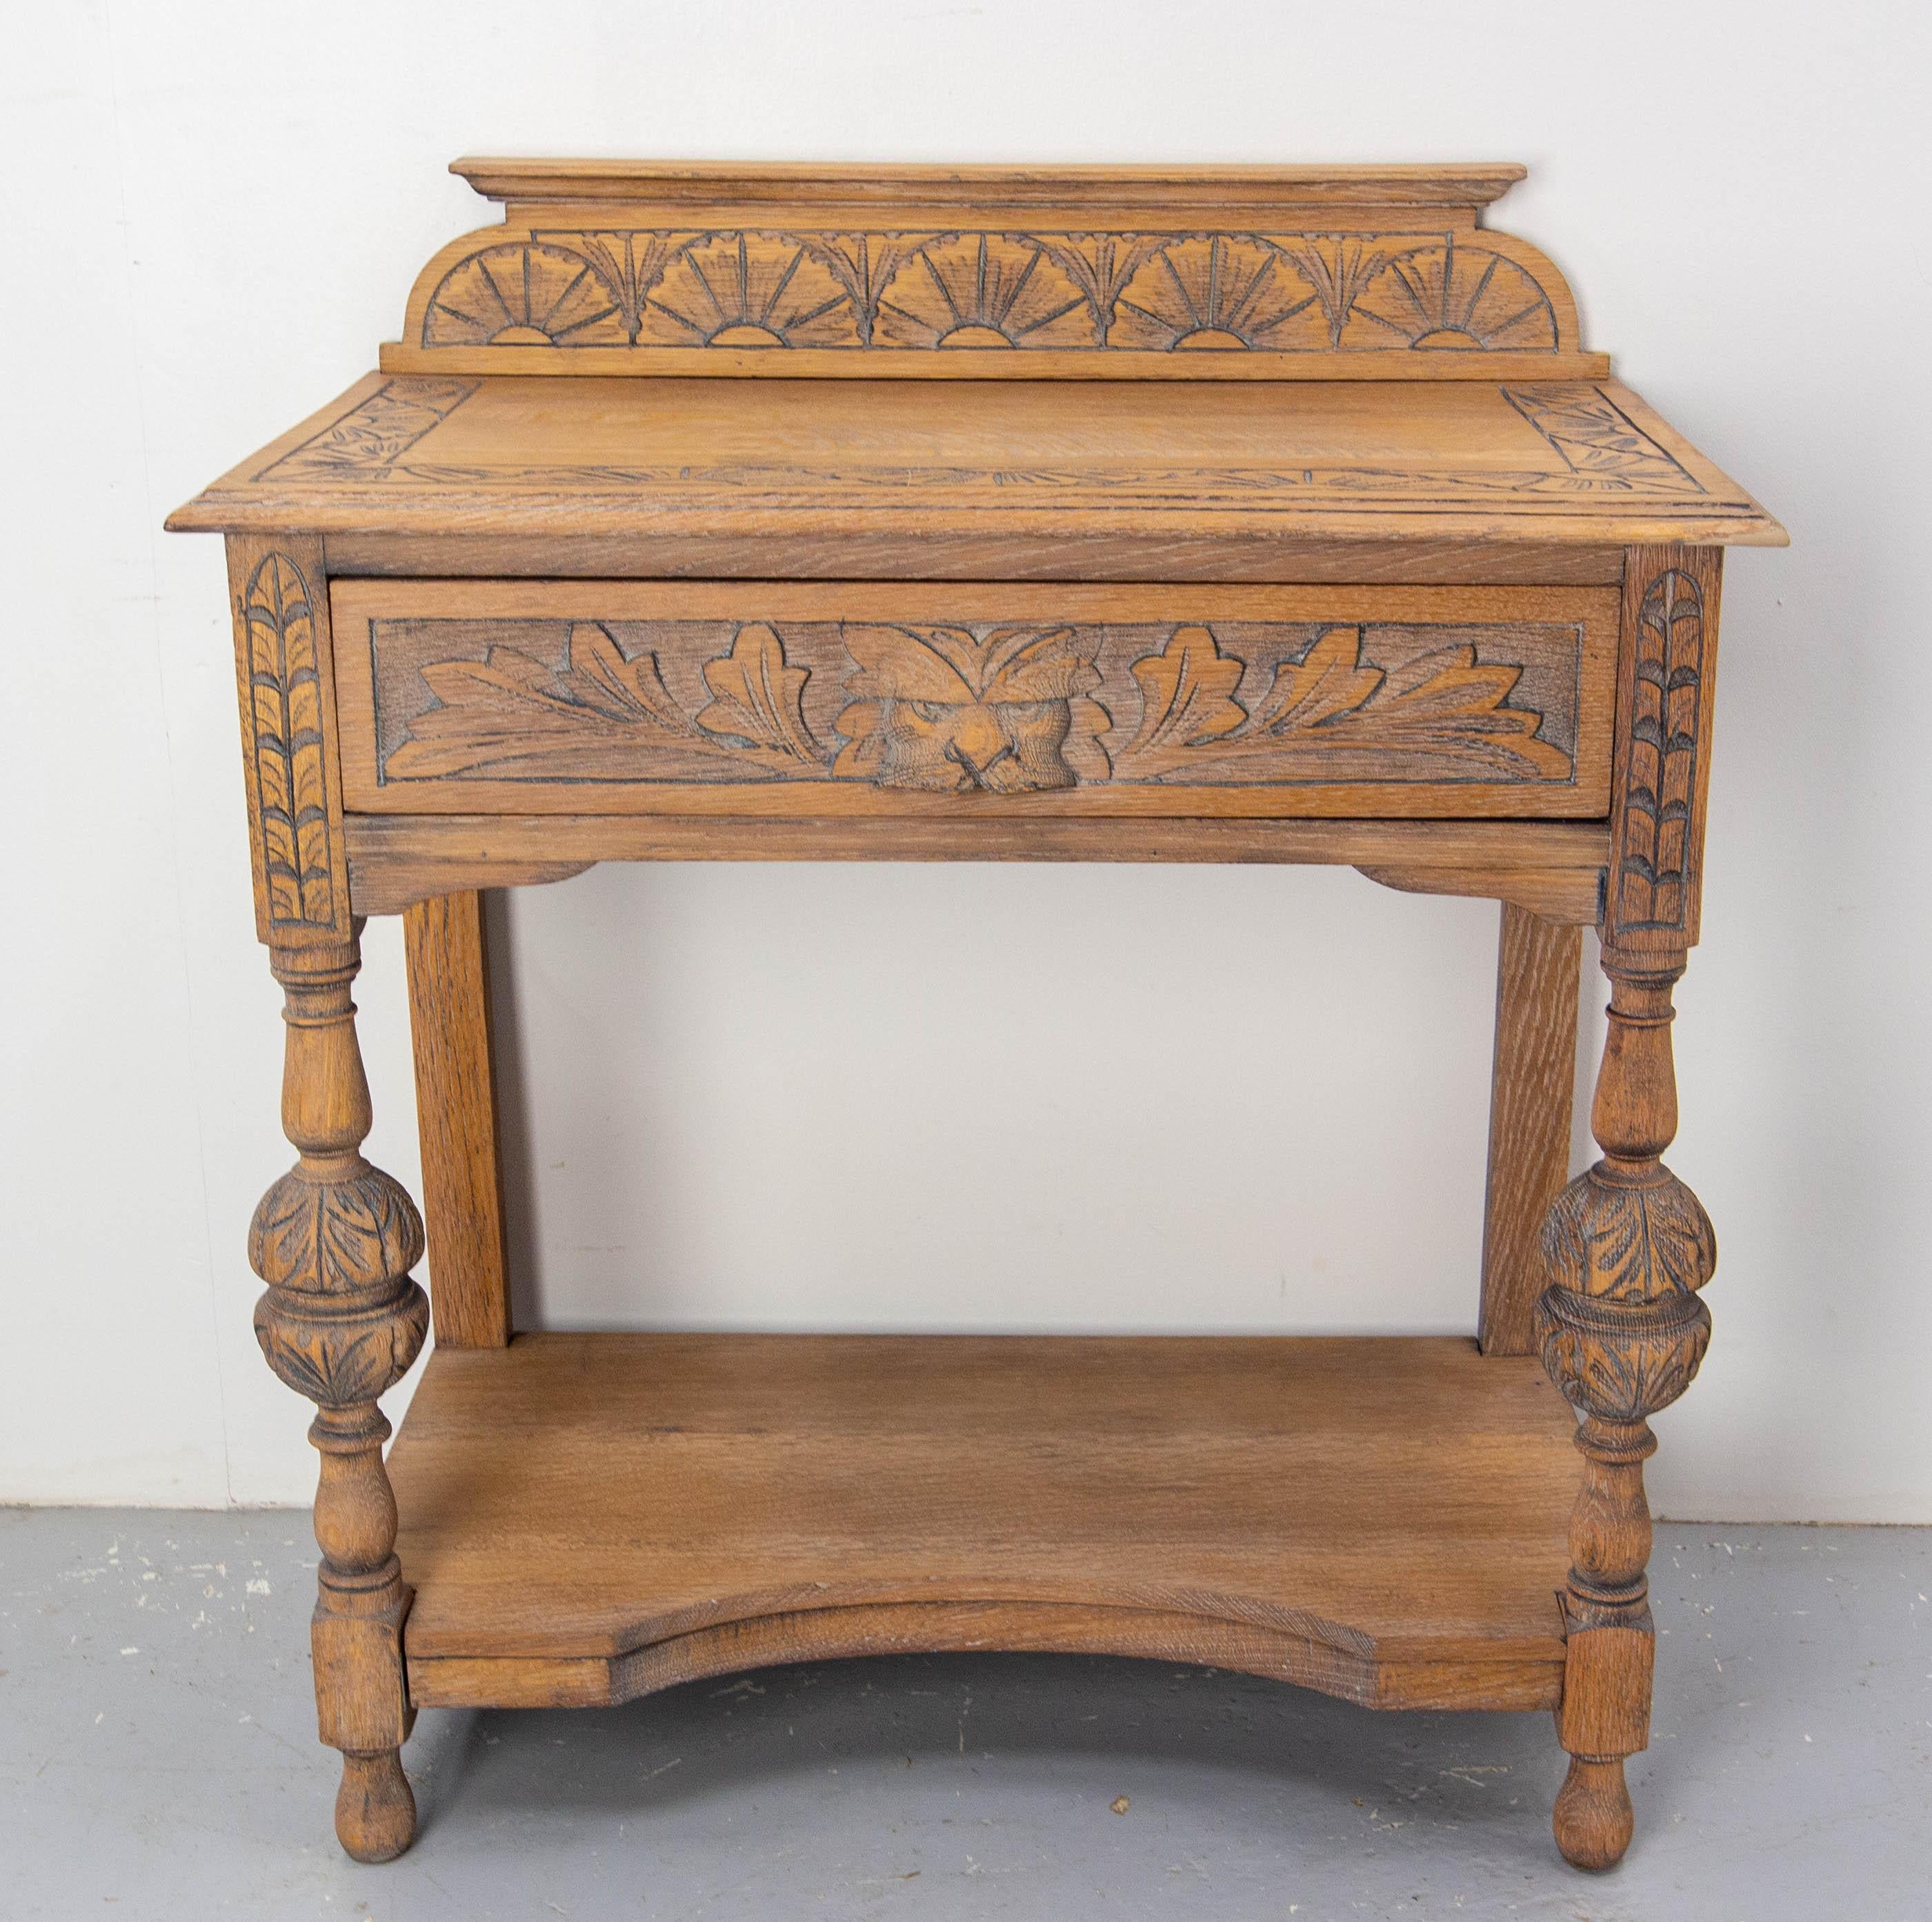 Writing table or desk Henri II (also named Louis XIII style) 19th century with lion masque drawer handle
Table height: 27.56 in. (70 cm)
Hand carved oak
Refinishing by our cabinet maker with oil and white pigment which highlights the pores of the